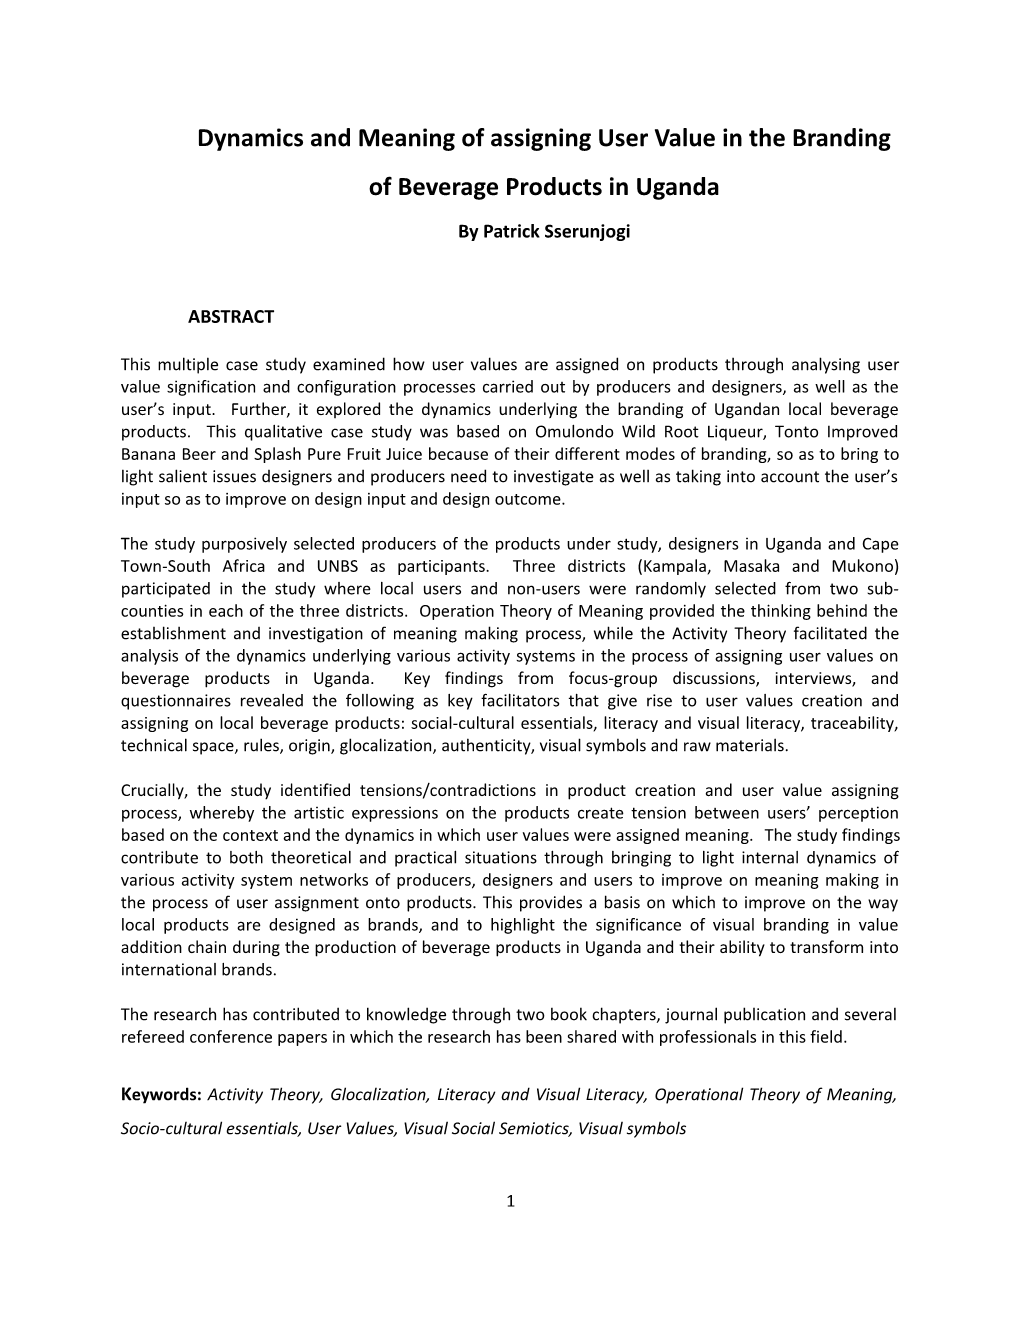 Dynamics and Meaning of Assigning User Value in the Branding of Beverage Products in Uganda